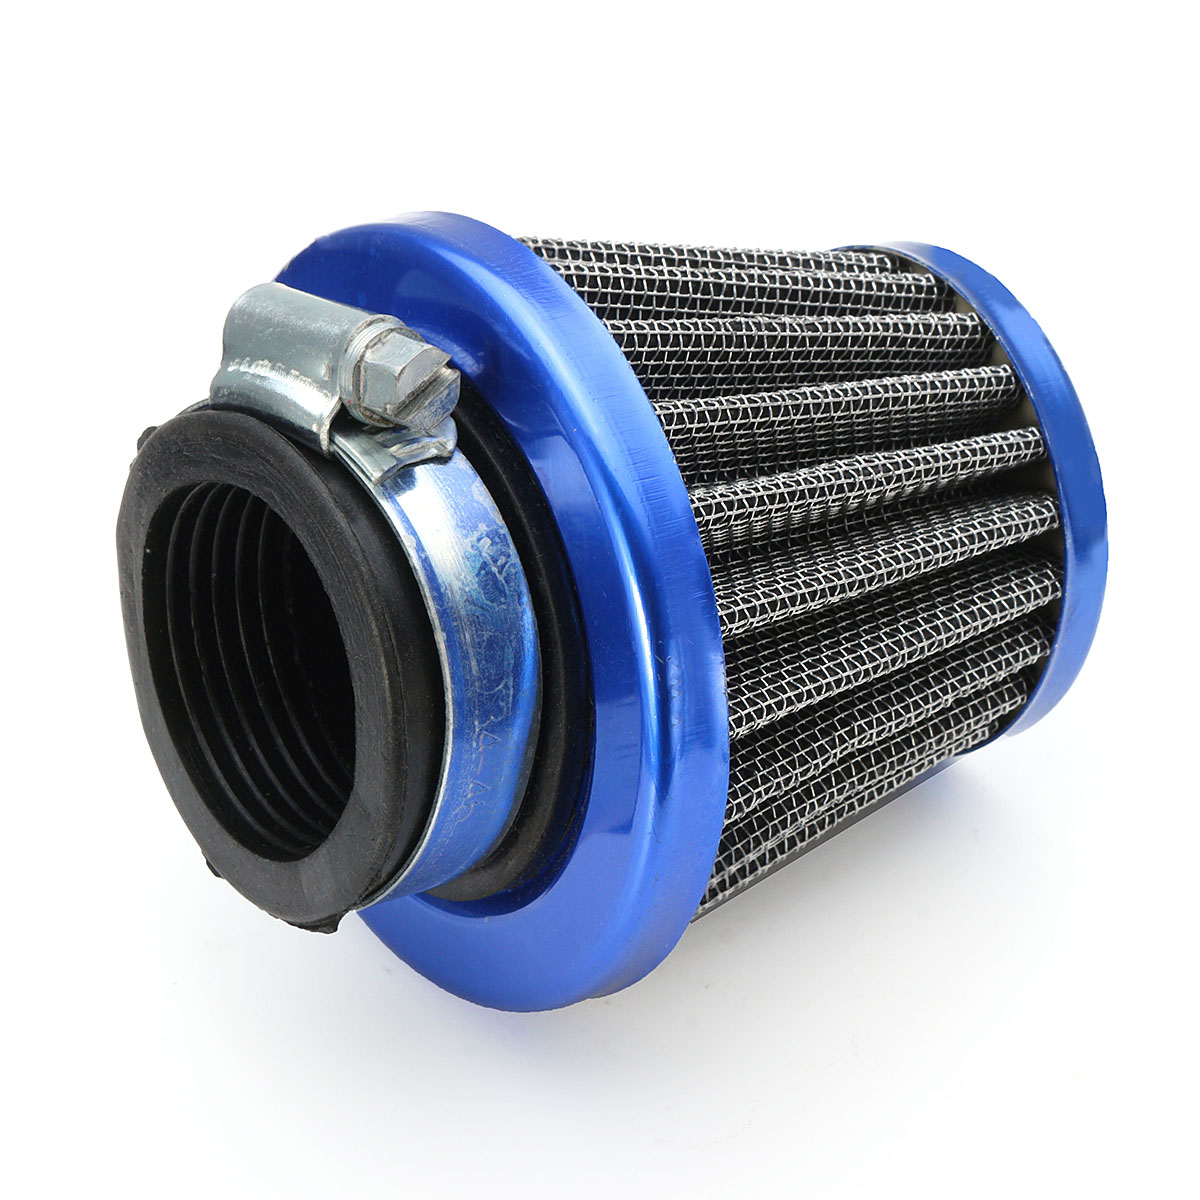 35mm38mm40mm42mm45mm48mm-Air-Filter-for-GY6-50cc-QMB139-Moped-Scooter-1126918